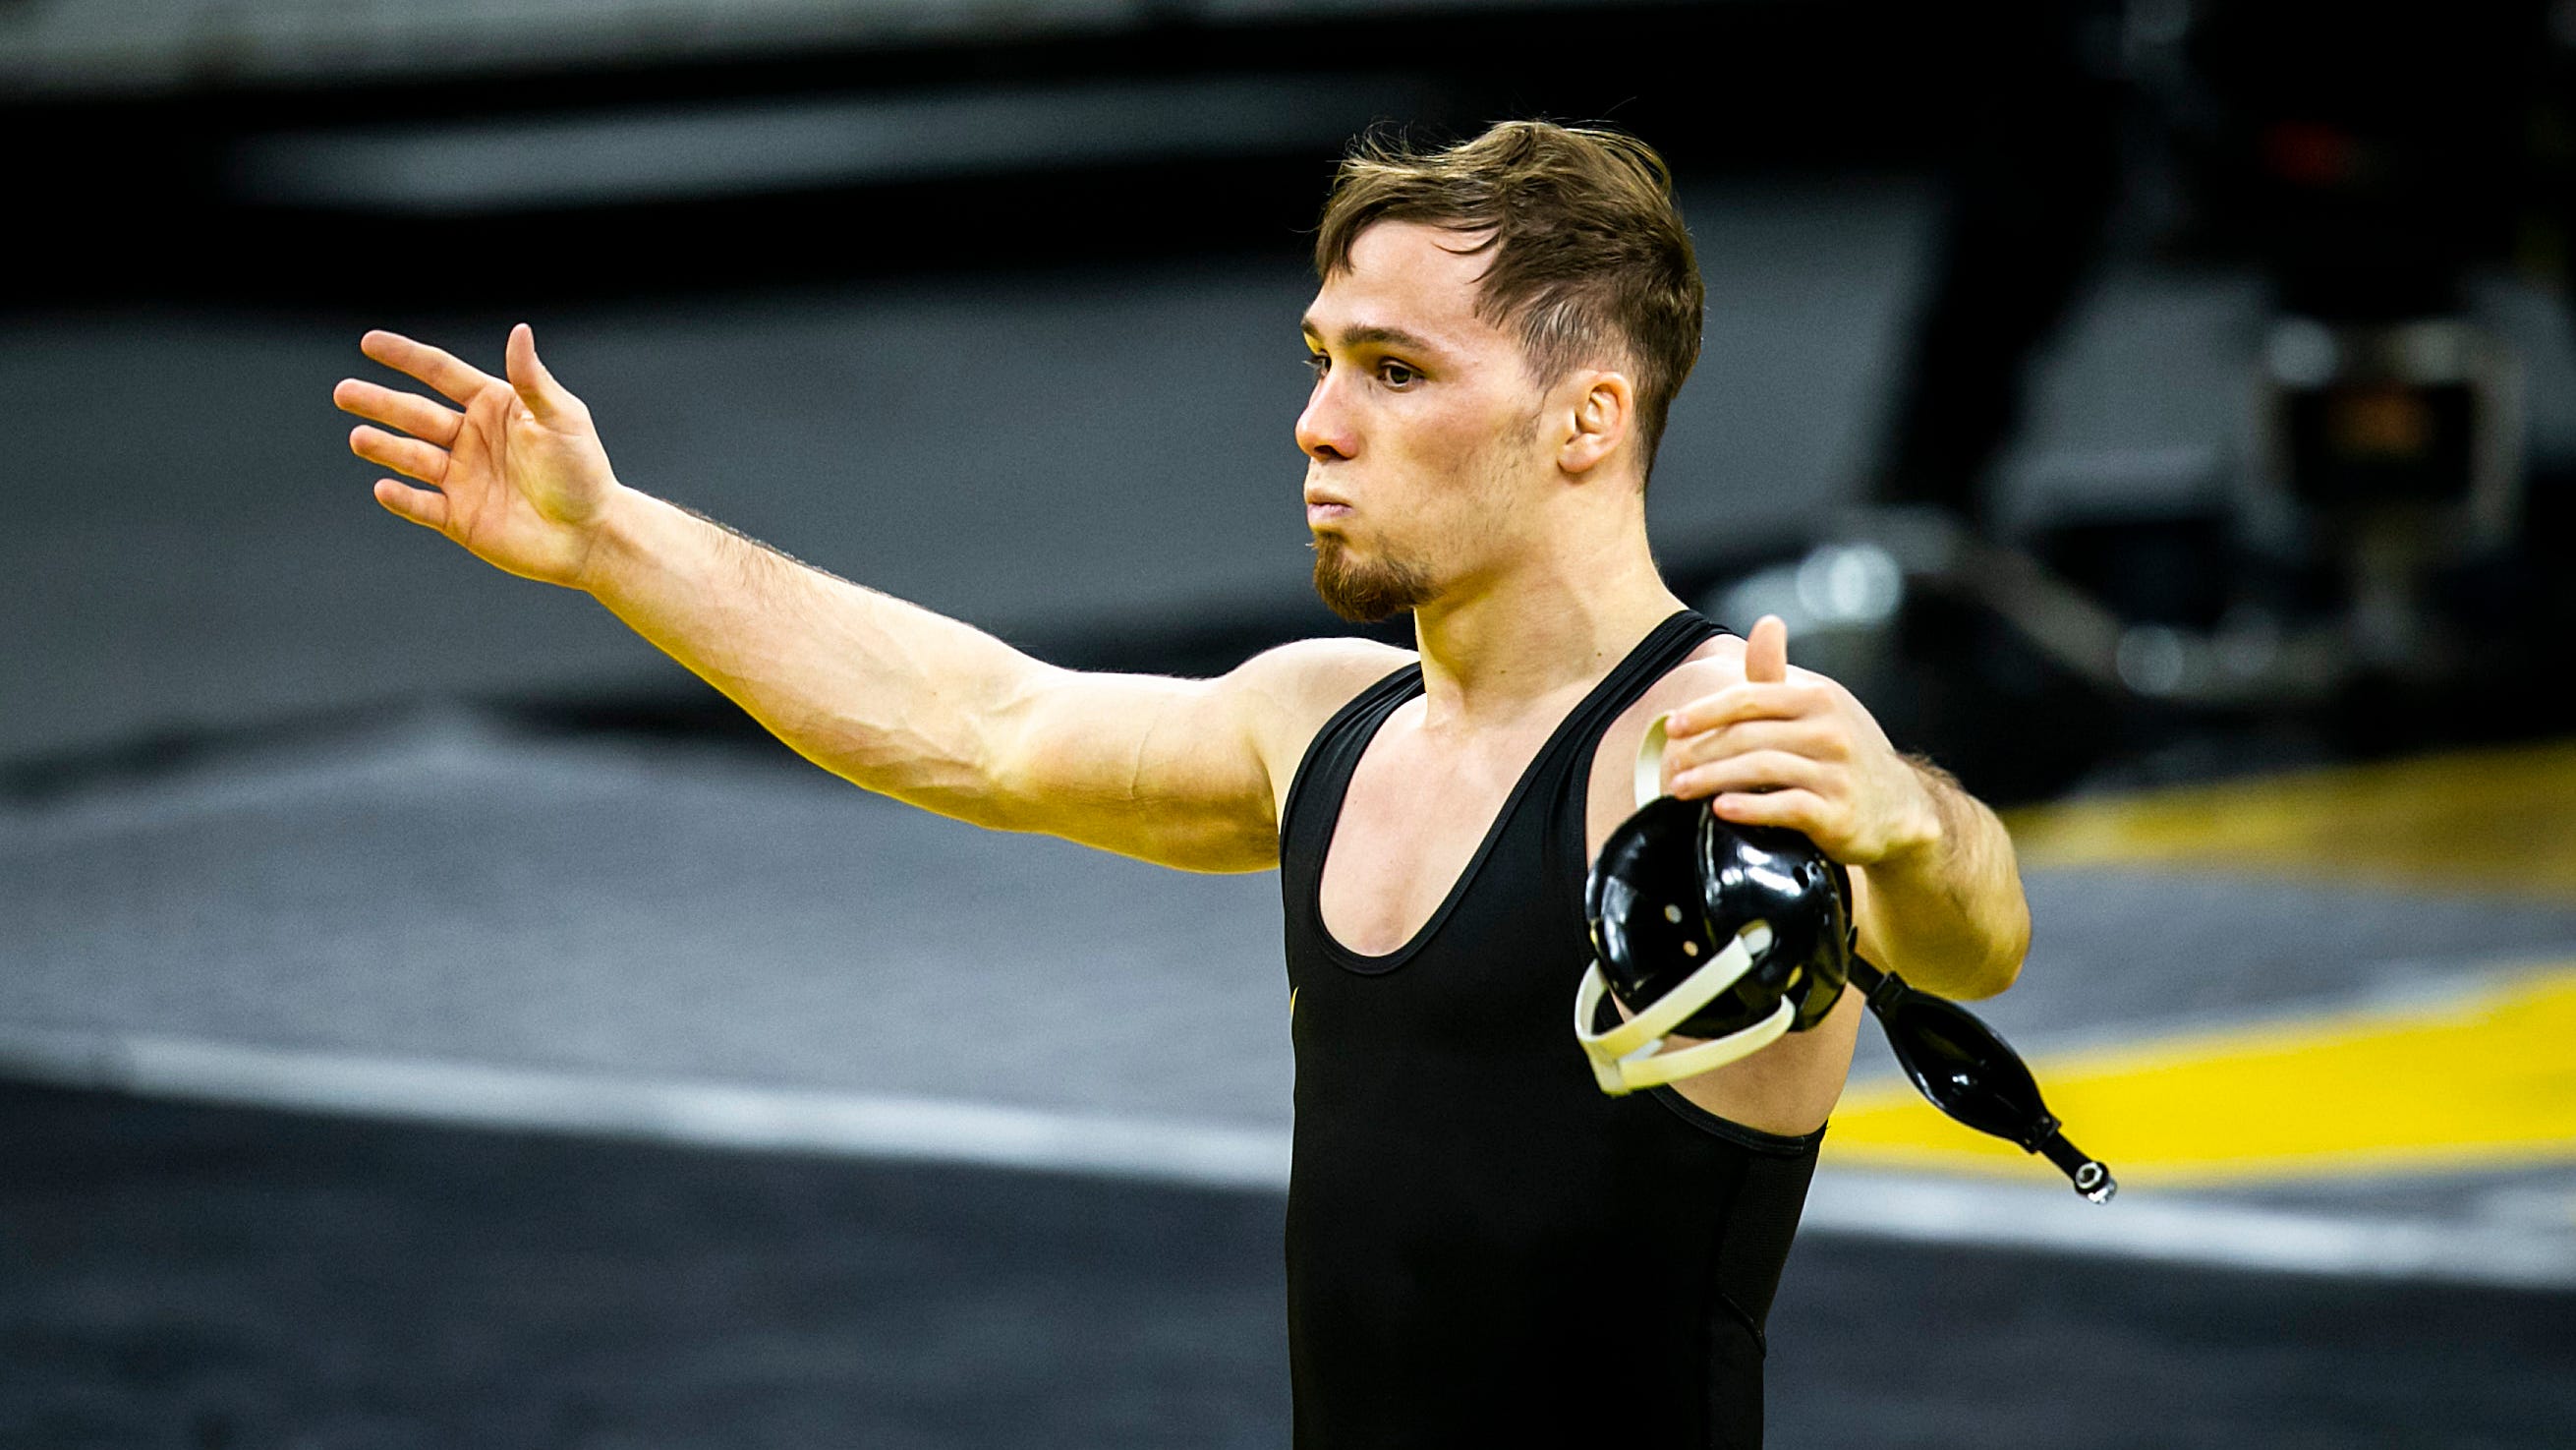 Iowa wrestling's Spencer Lee is a star NCAA wrestler. Here's why